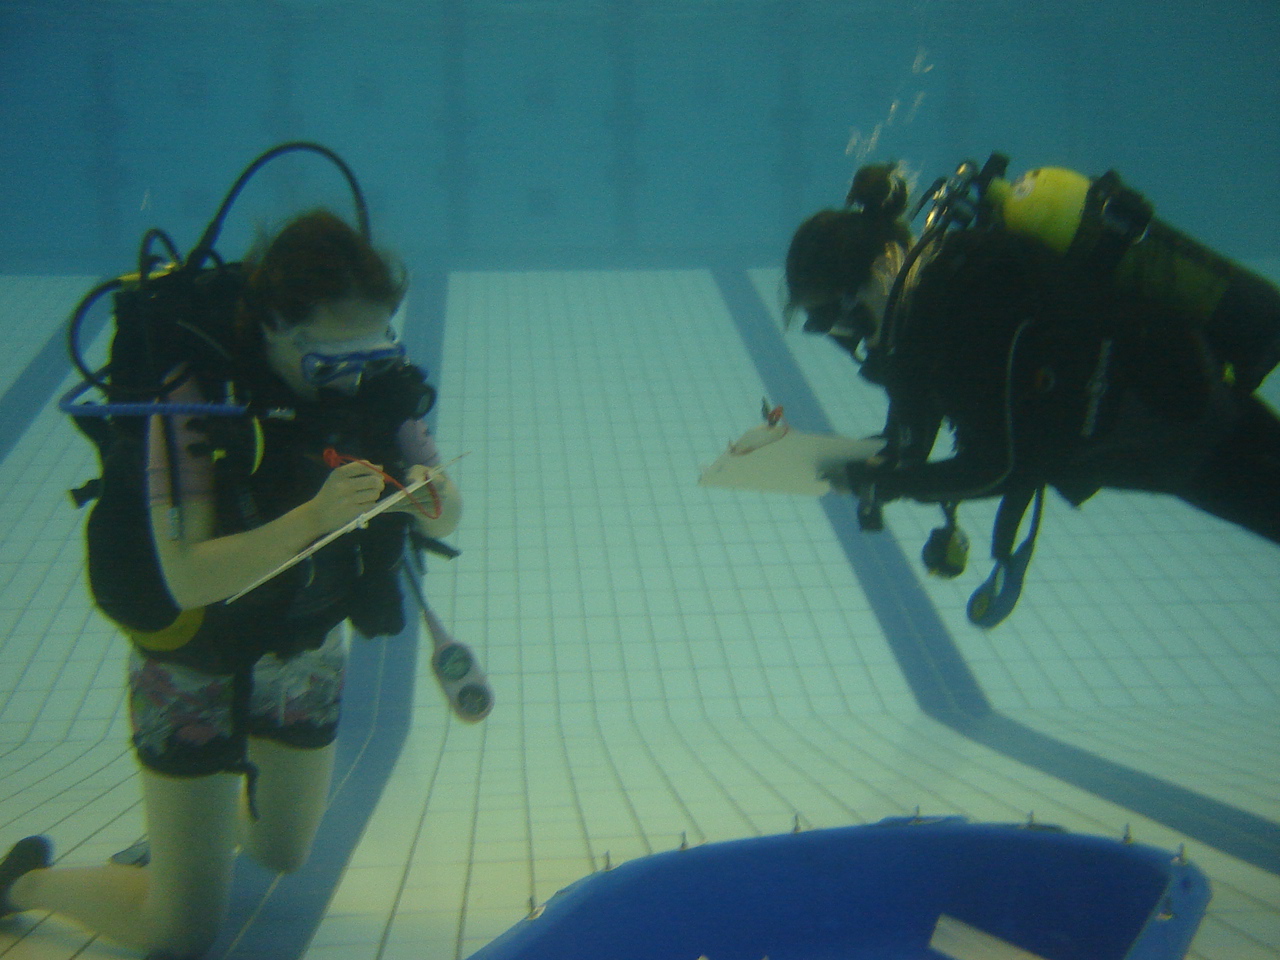 Students Learning to Survey & Record Underwater